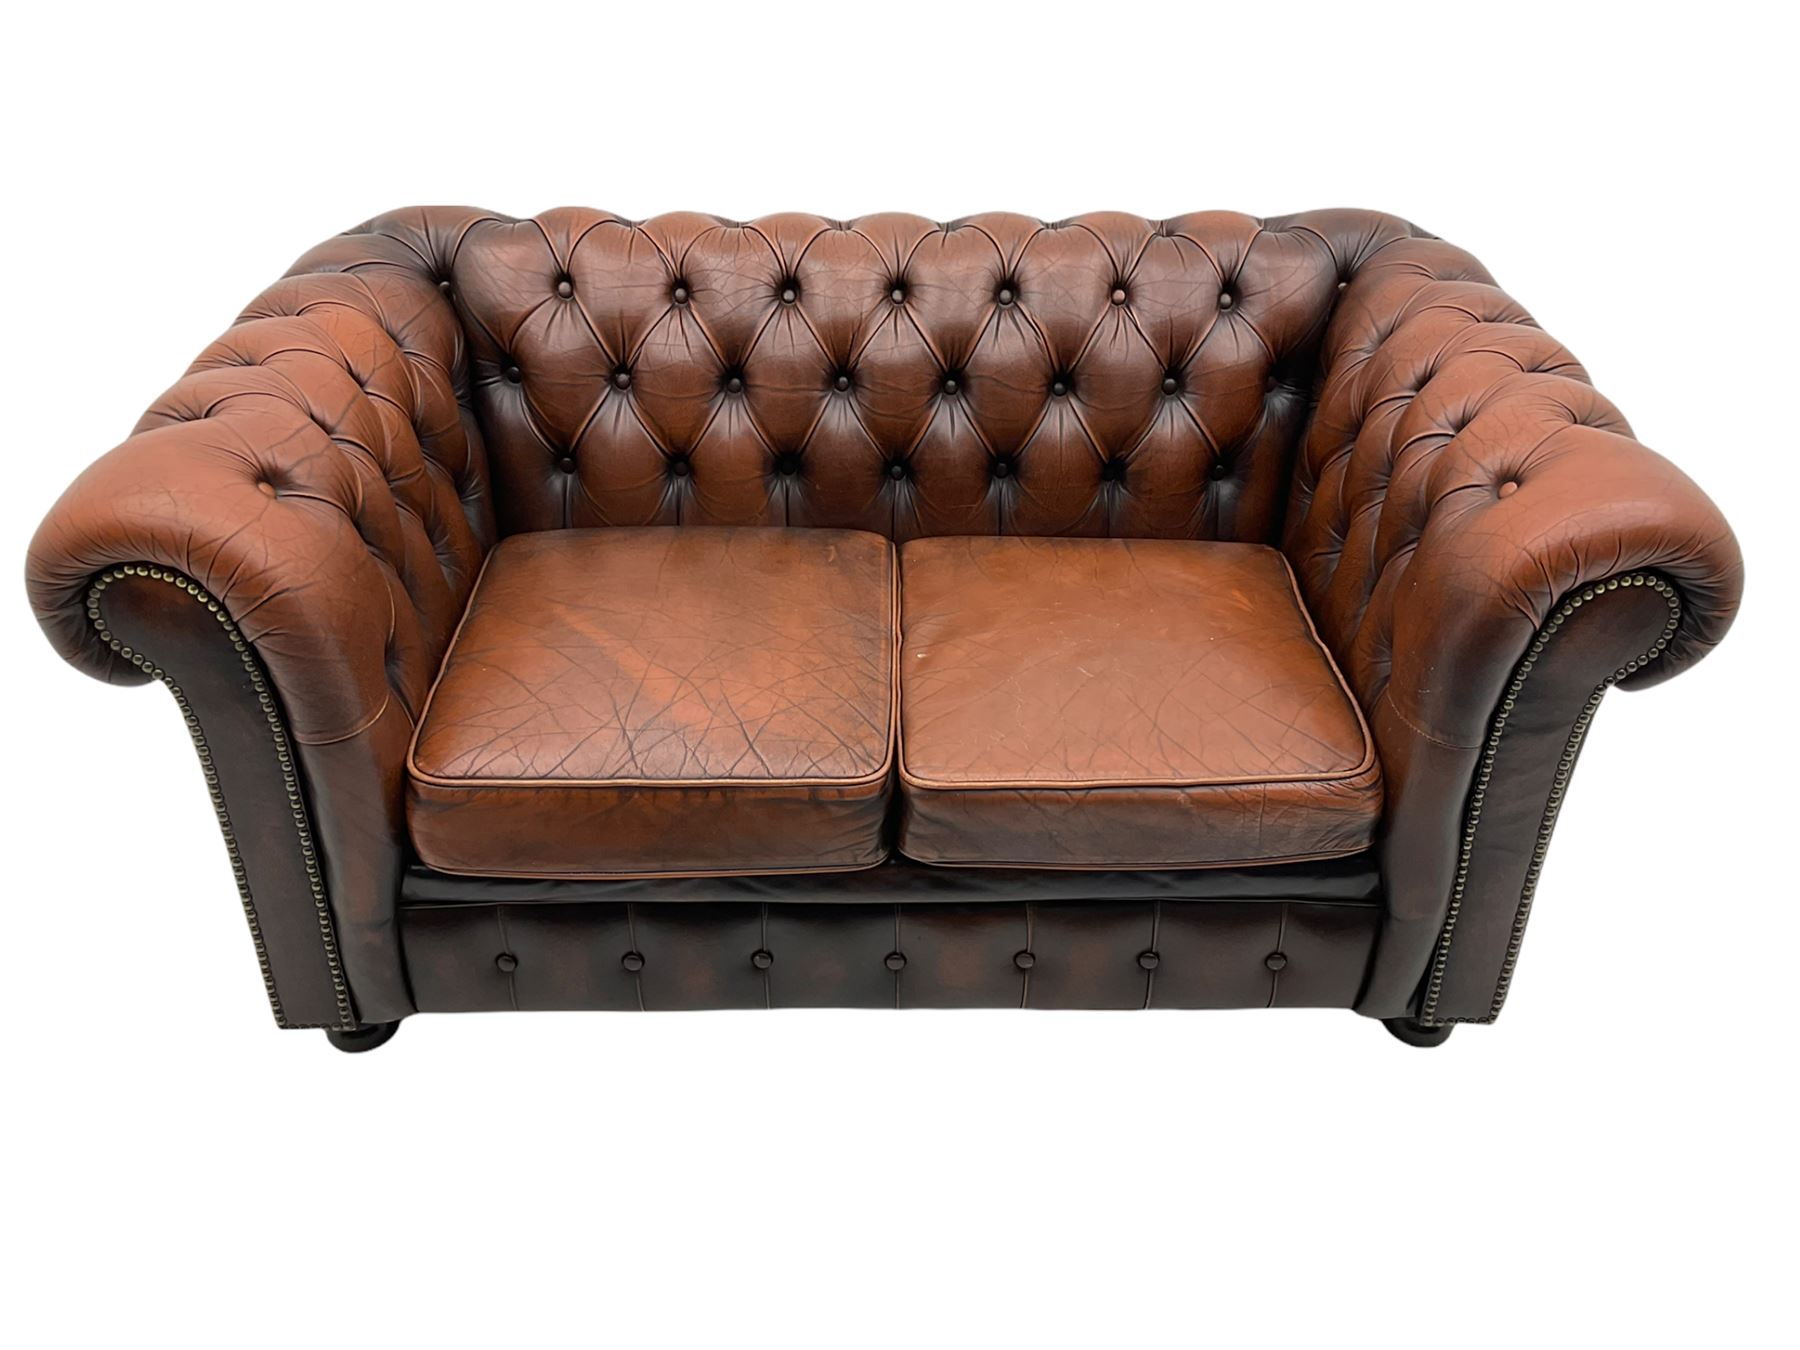 Chesterfield two seat sofa - Image 2 of 6